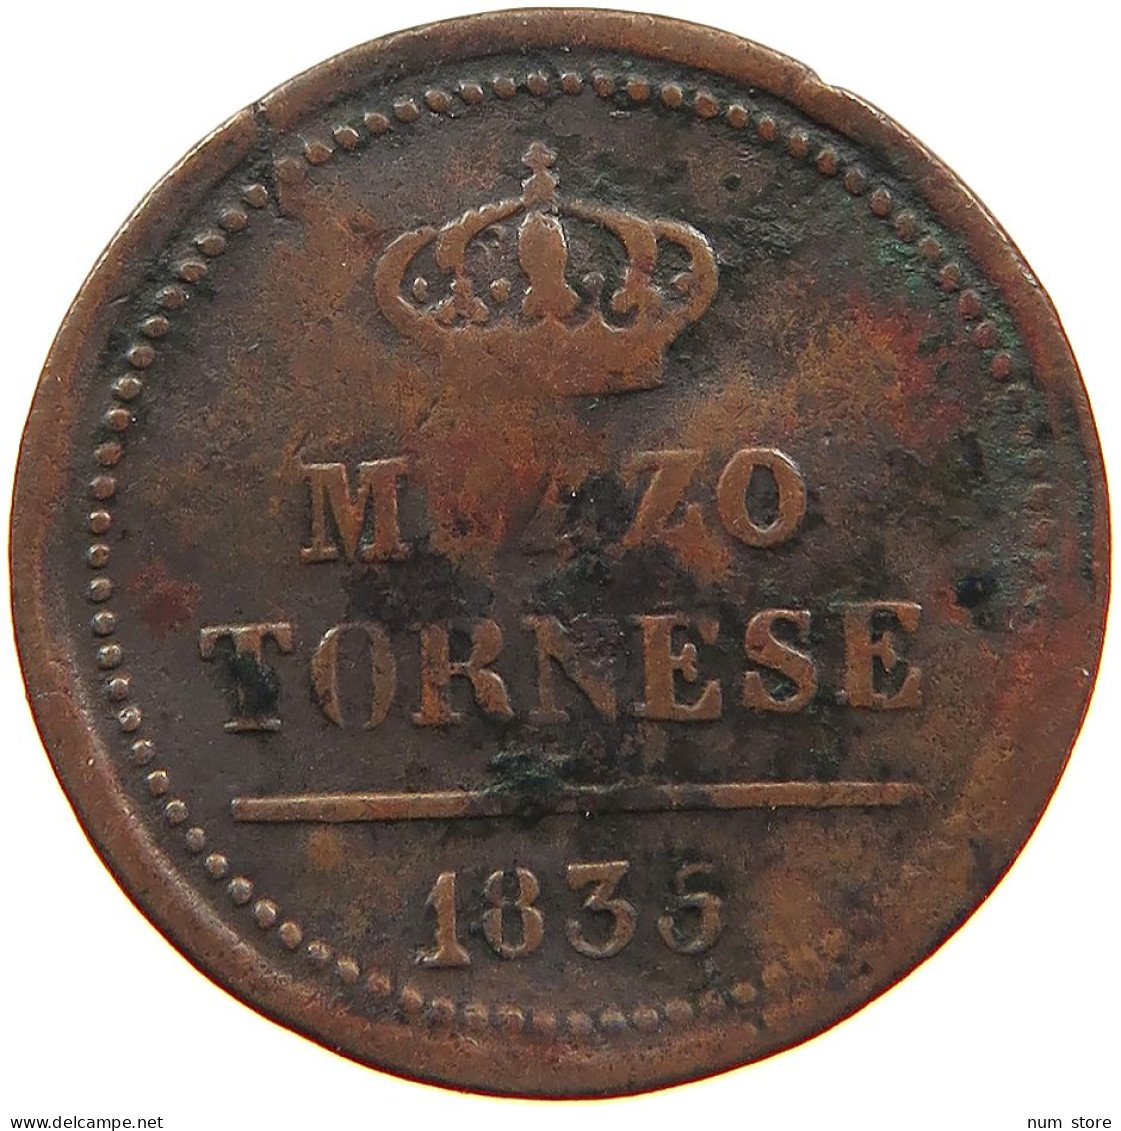 ITALY STATES NAPLES SICILY 1/2 TORNESE 1835 #s081 0561 - Neapel & Sizilien